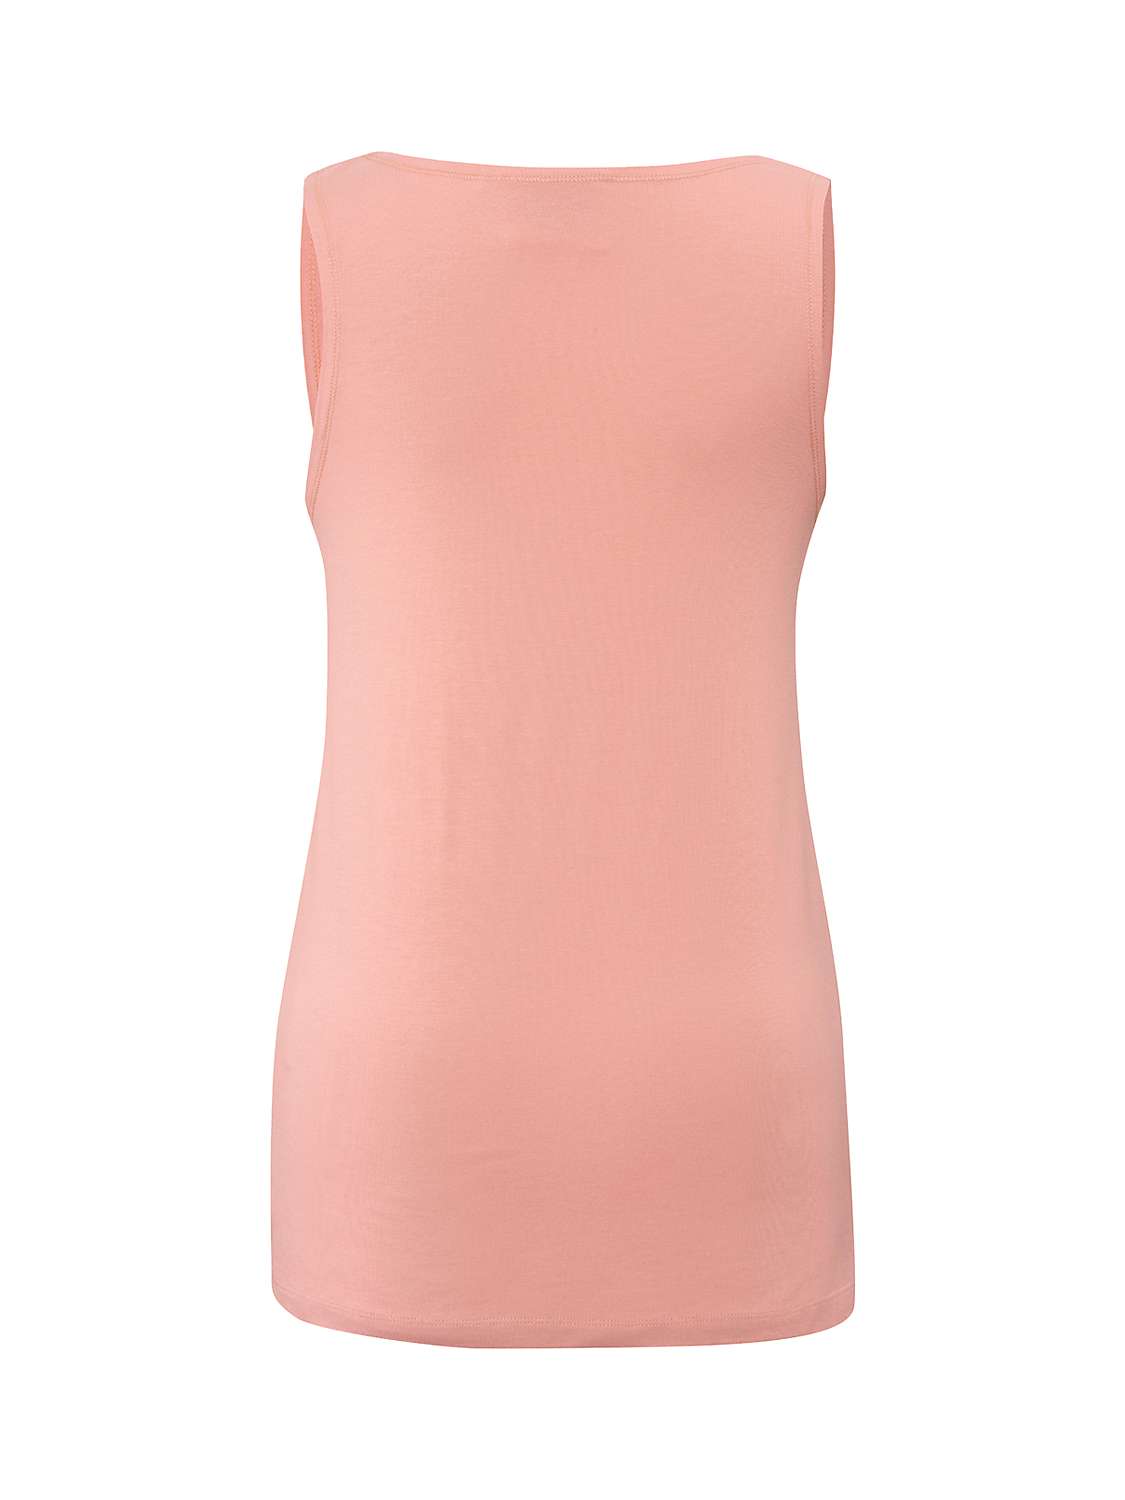 Buy Venice Beach Bailey Graphic Sports Top, Power Peach Online at johnlewis.com